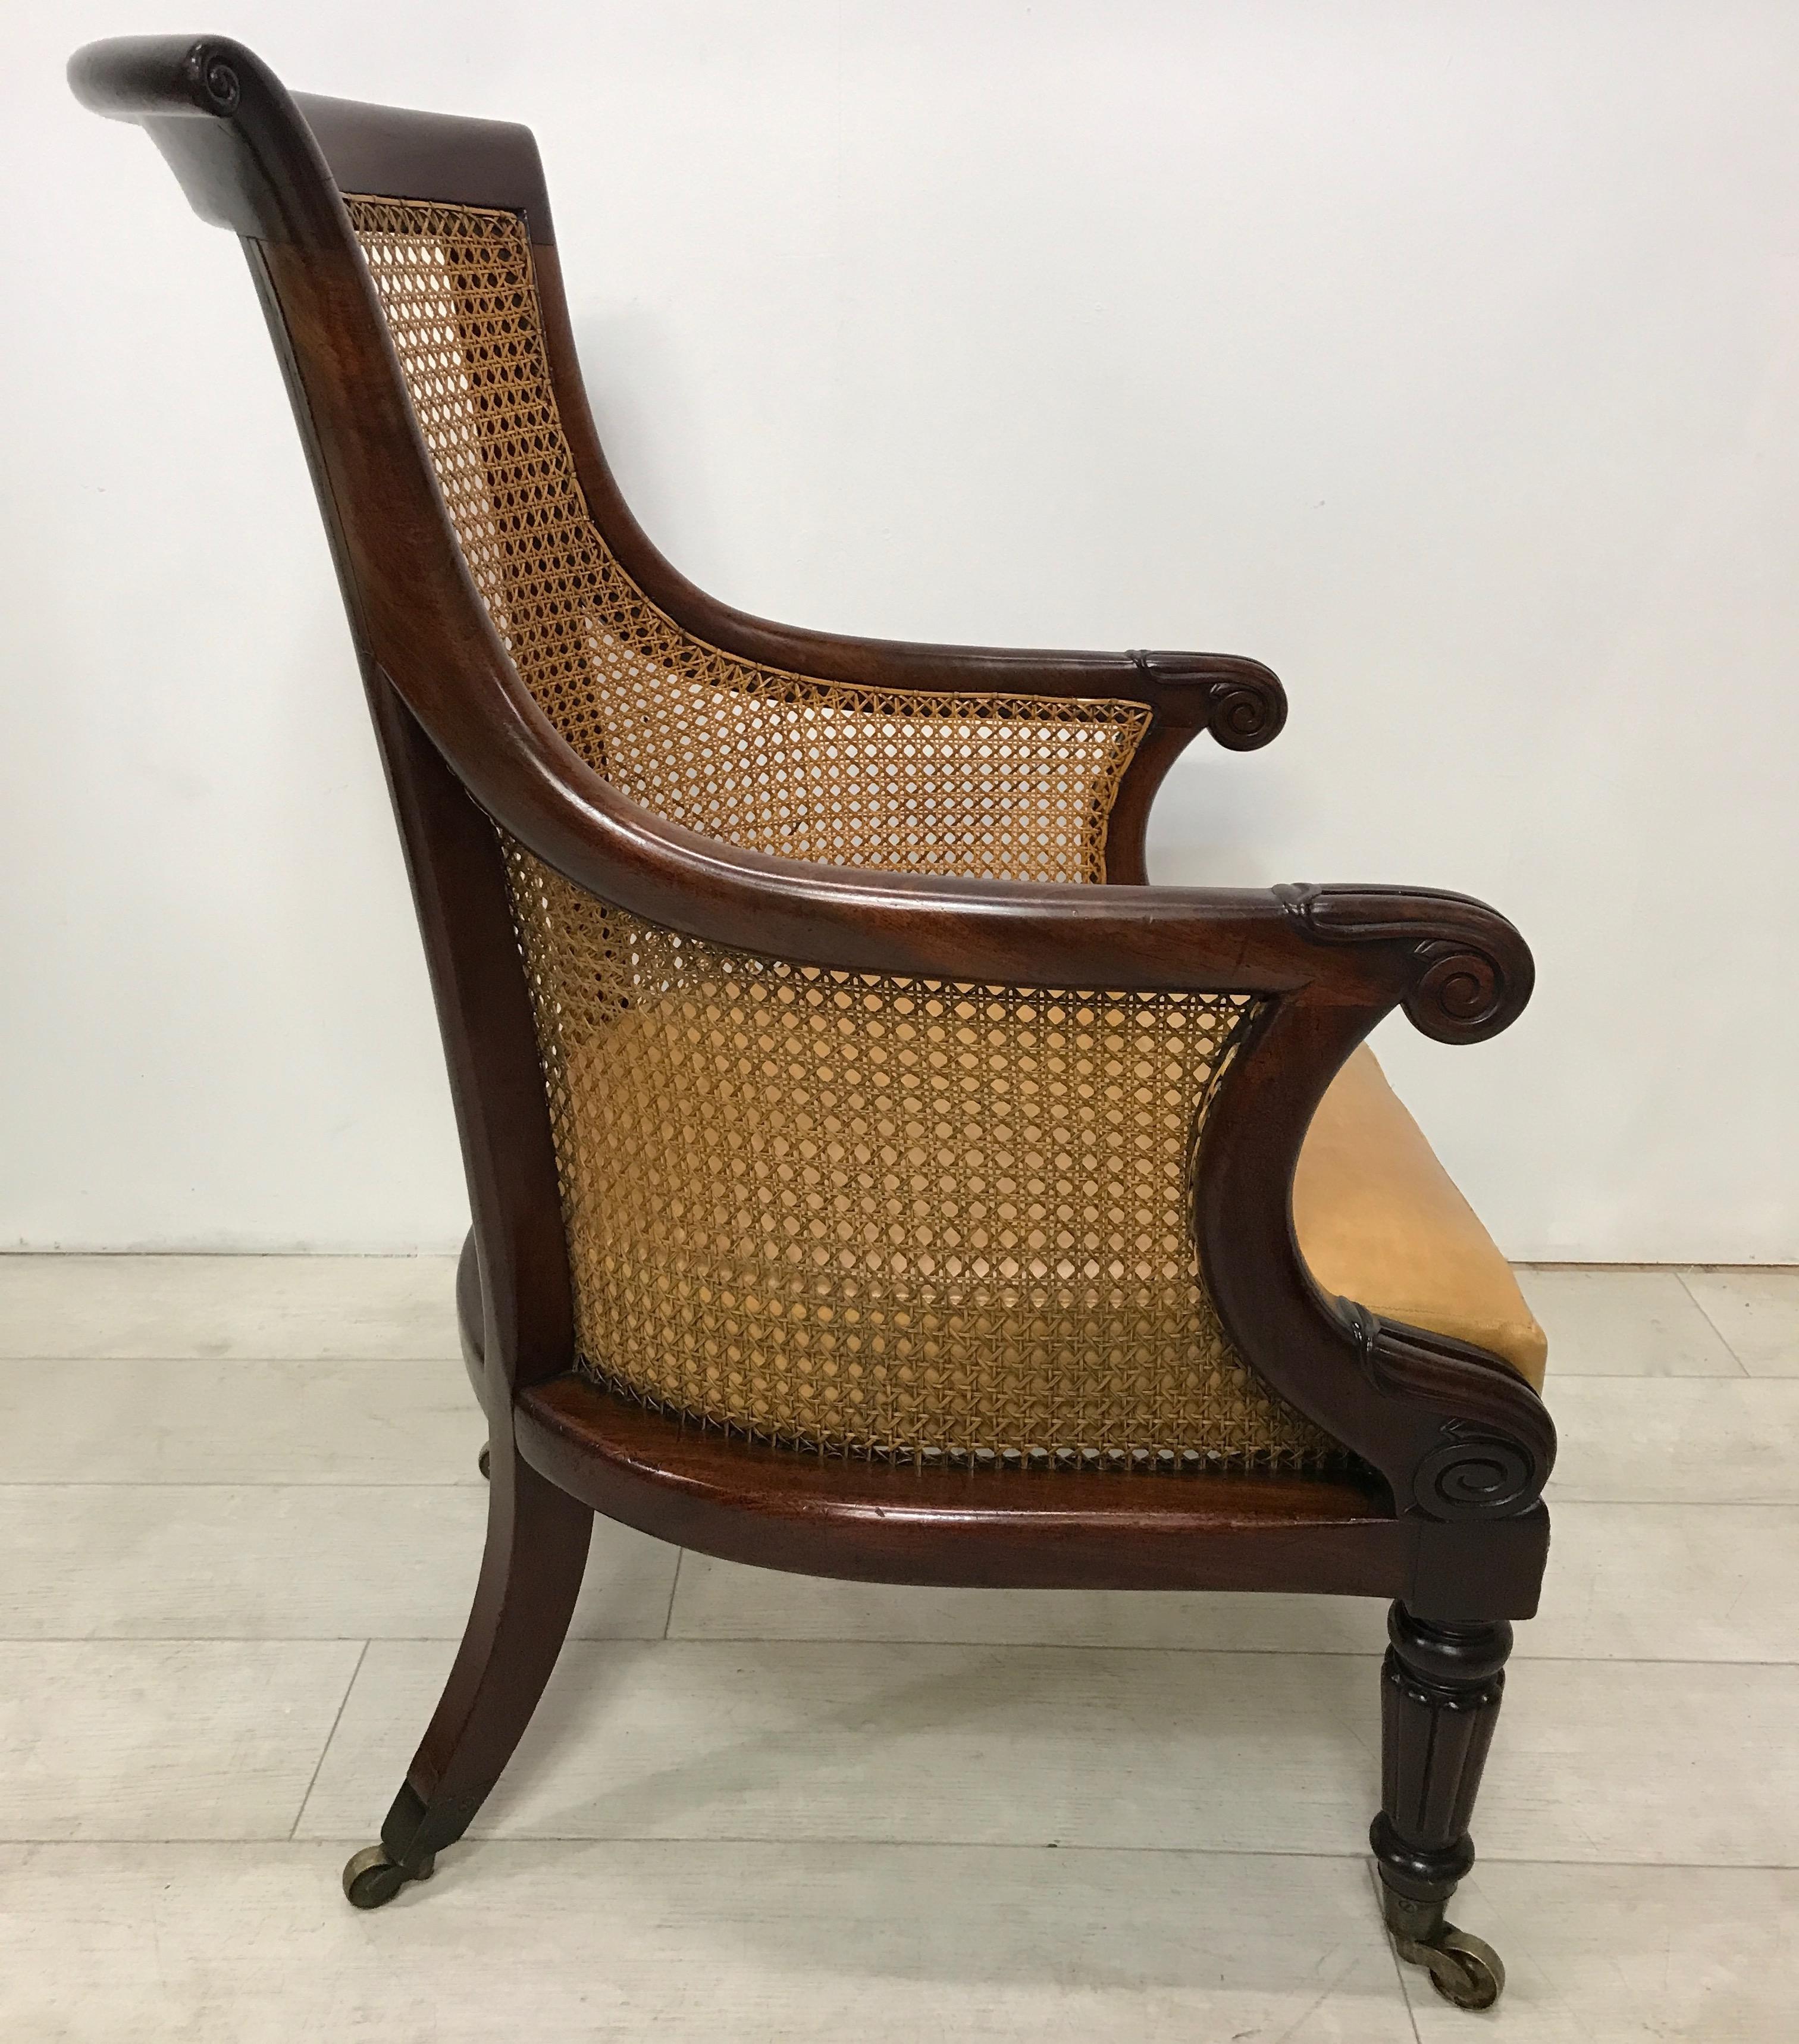 English Regency Period Mahogany and Caned Library Armchair, Early 19th Century 4